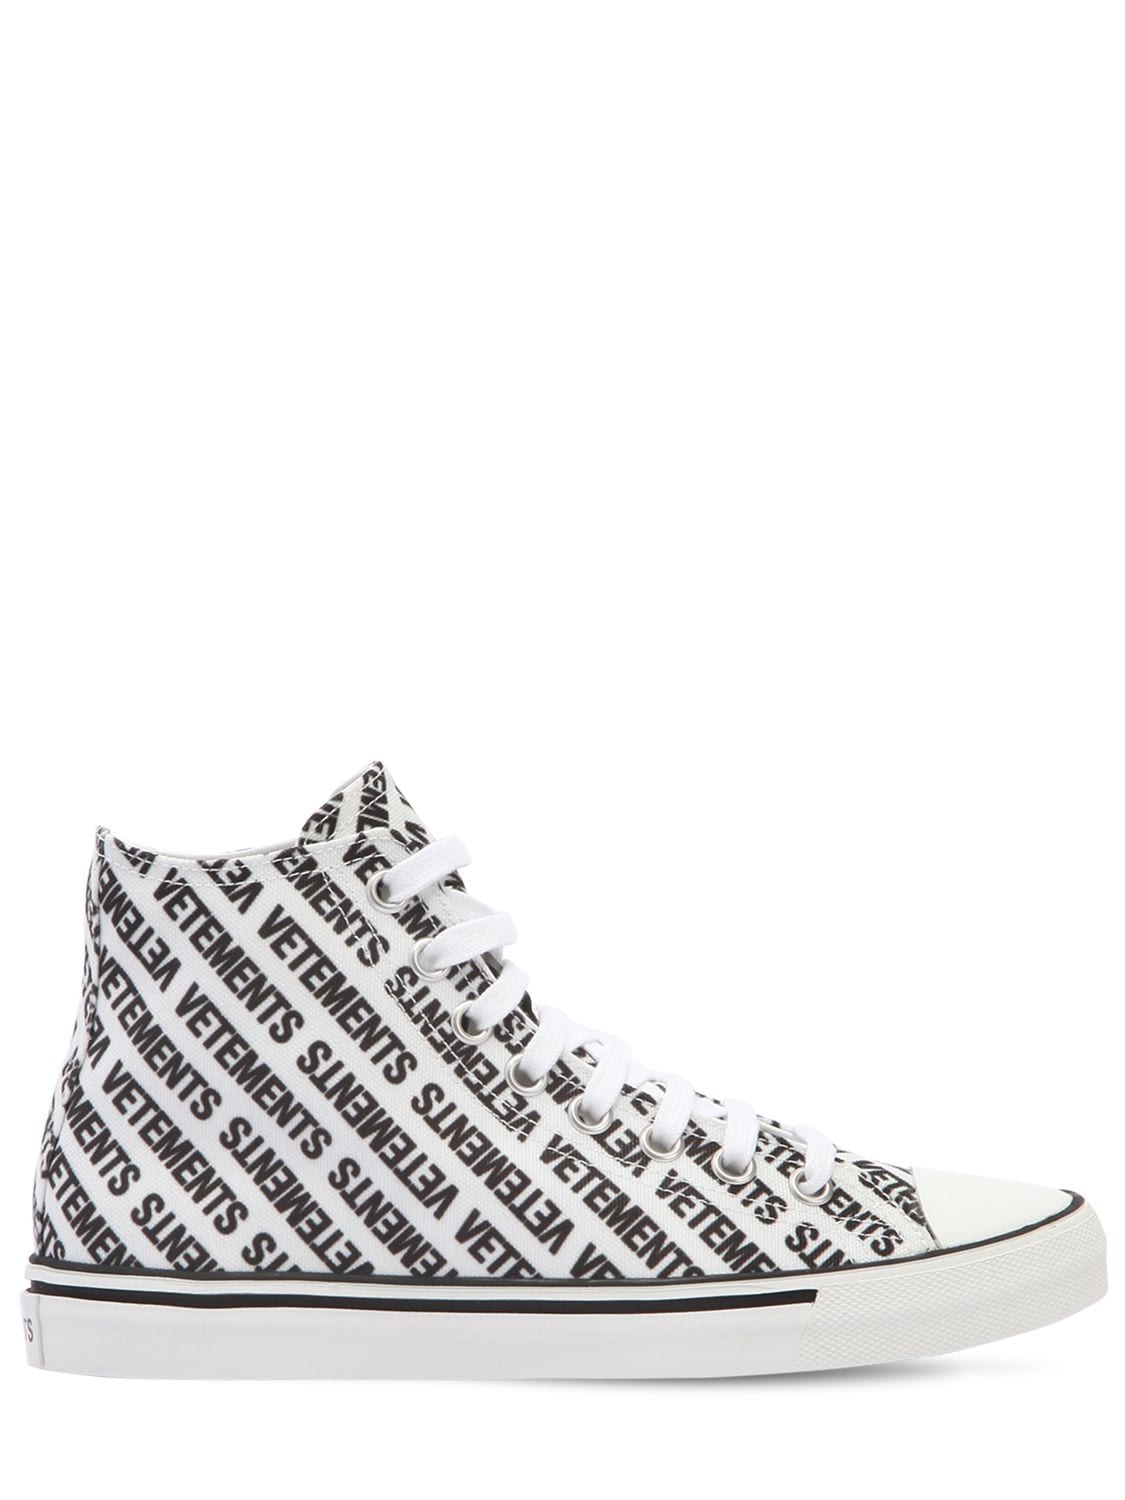 Vetements 20mm Logo Print Canvas High Top Sneakers In White/black